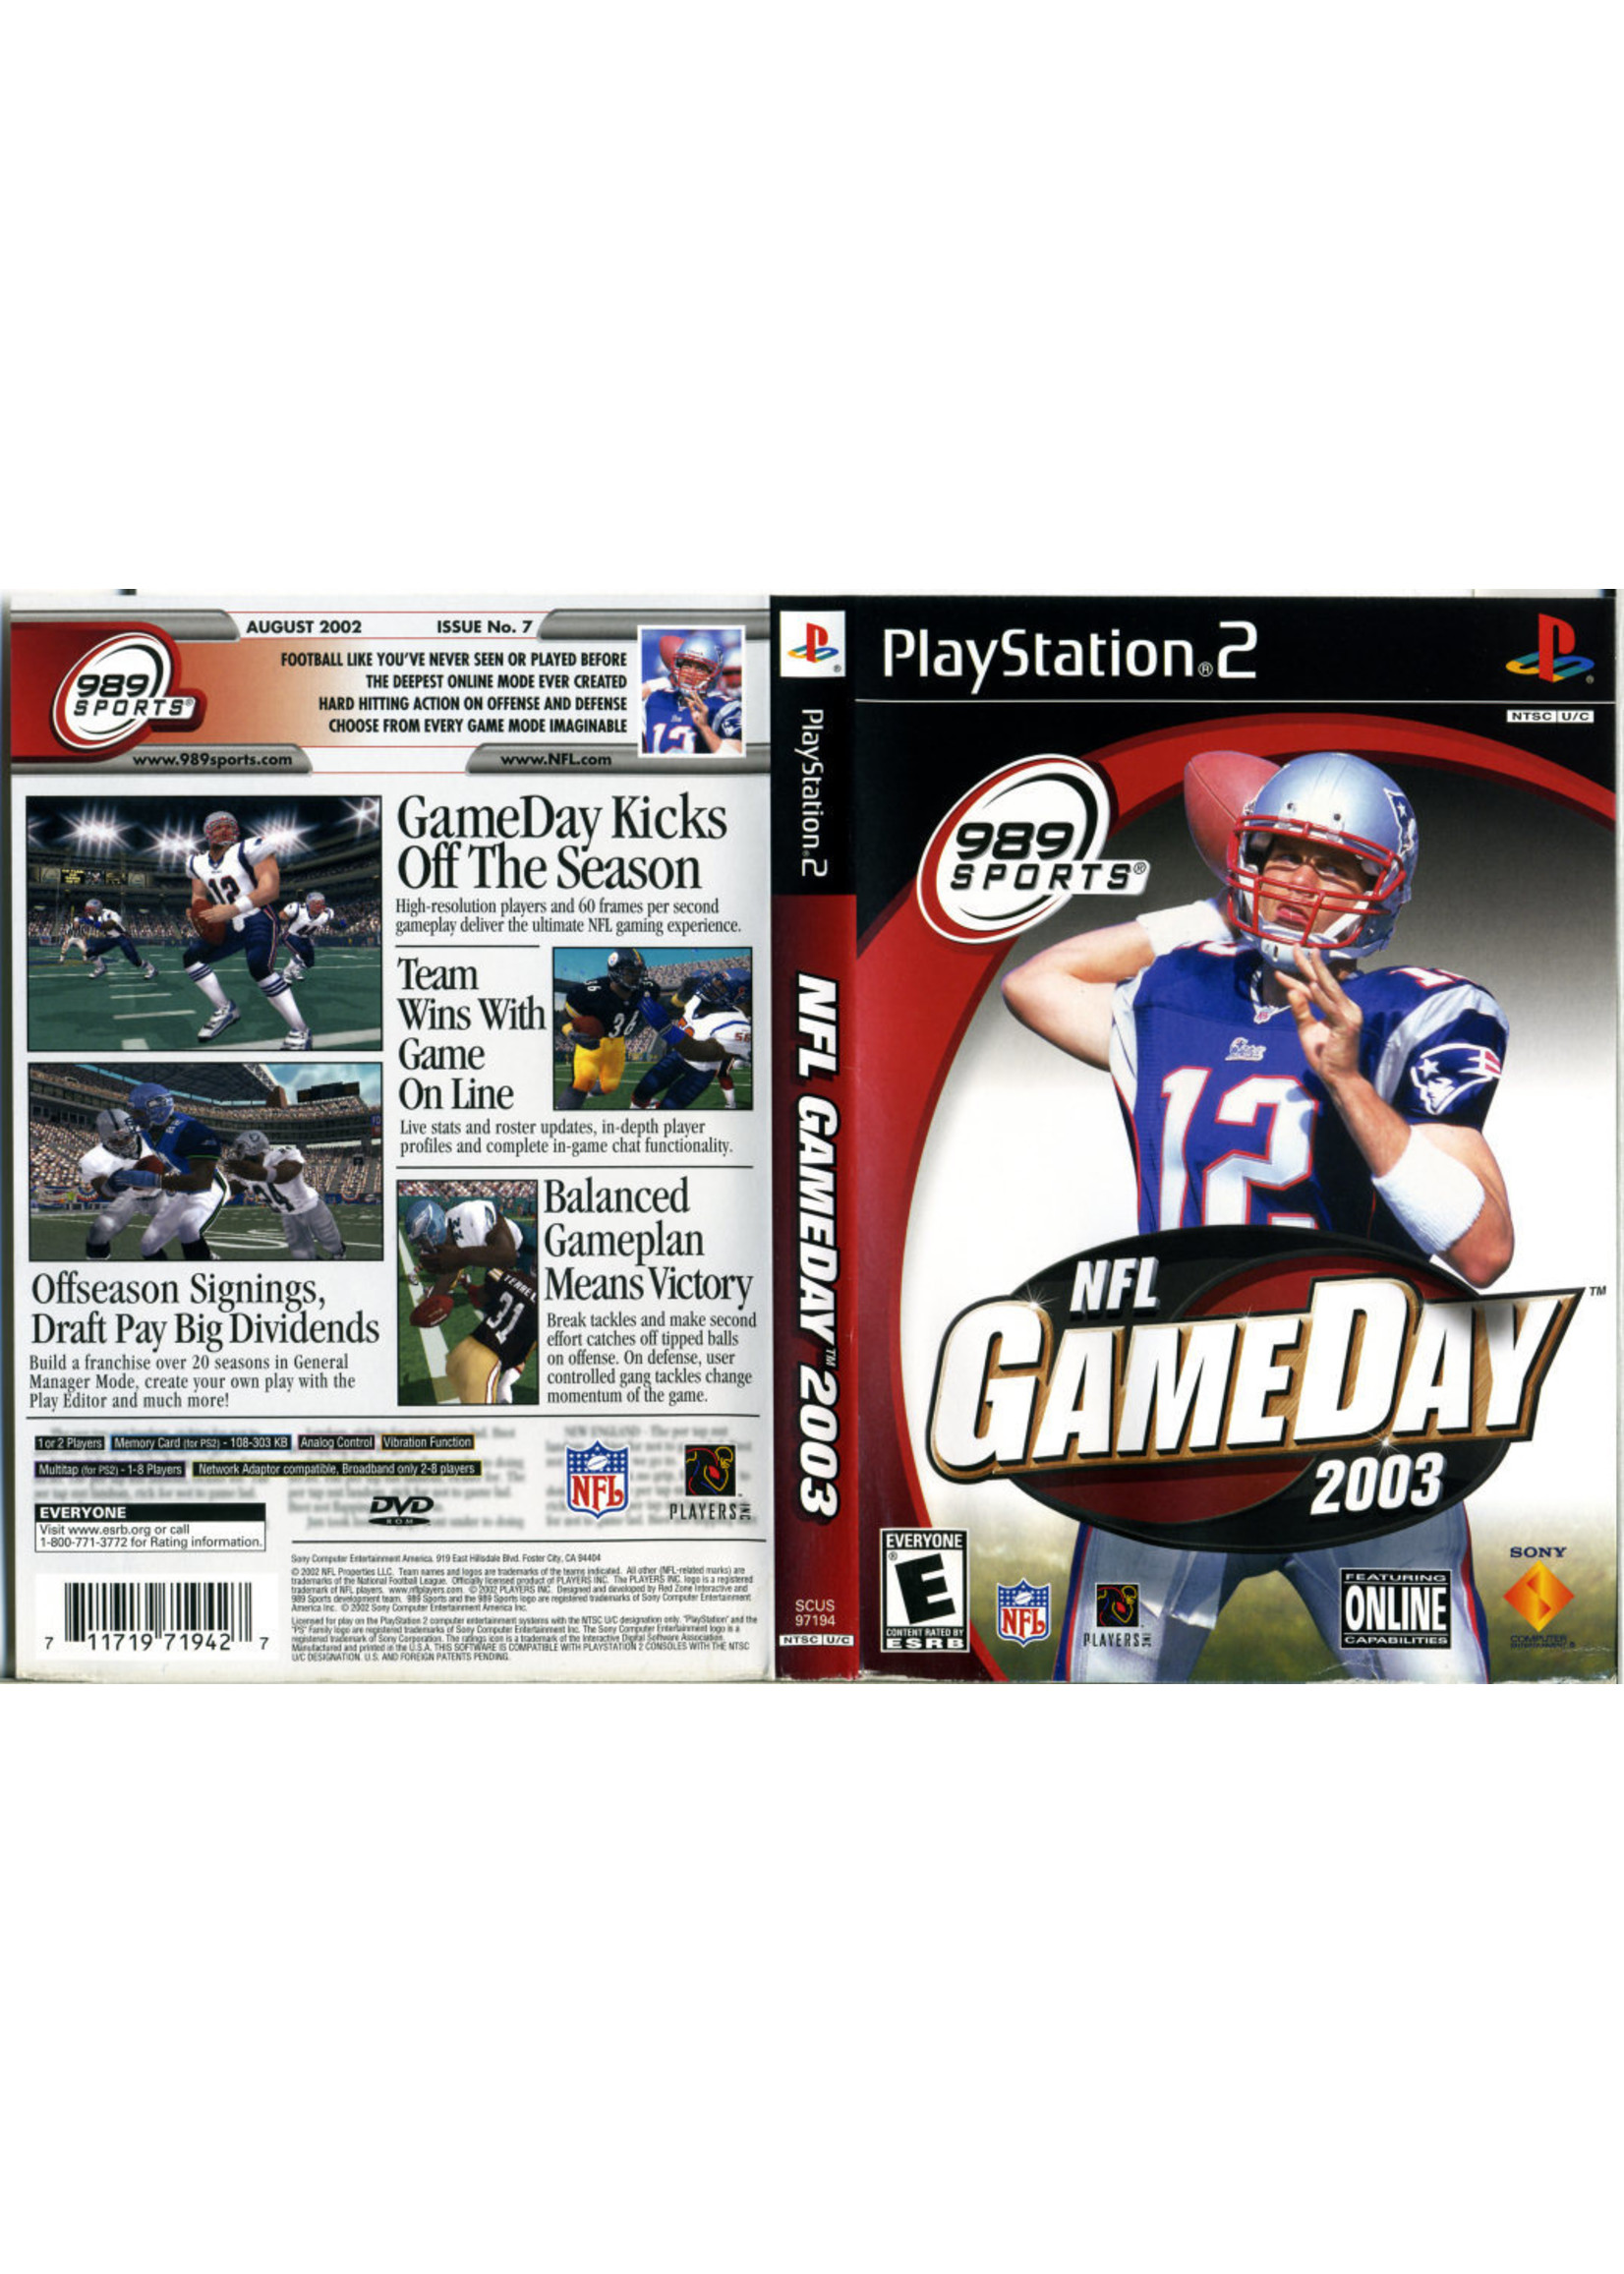 Sony Playstation 2 (PS2) NFL Gameday 2003